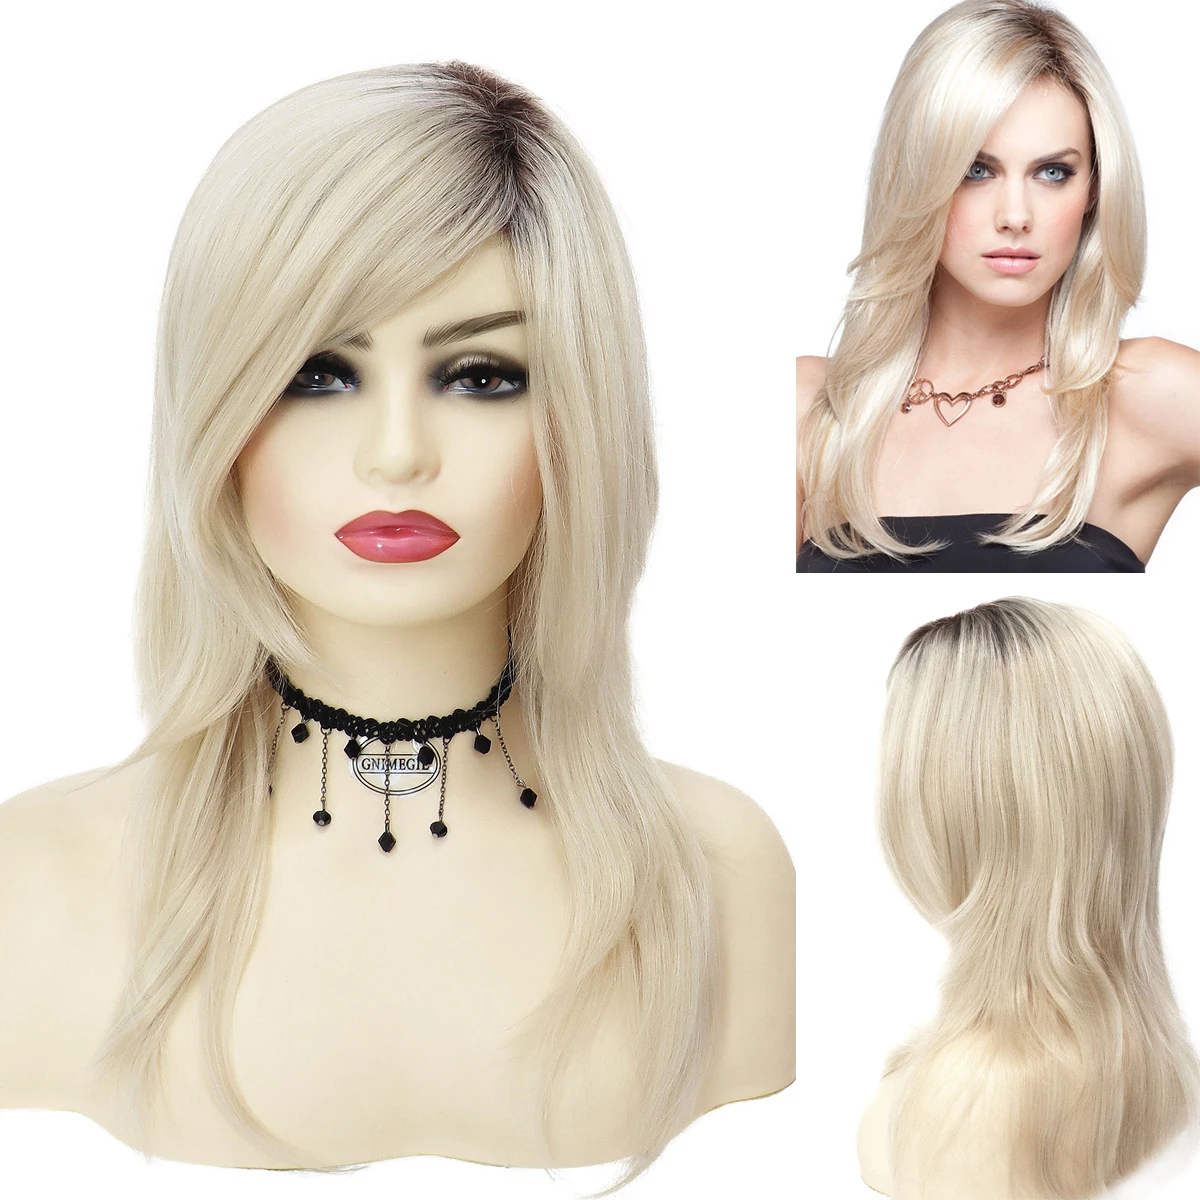 

GNIMEGIL Synthetic Long Blonde Wig with Bangs for White Women Ombre Wig with Dark Roots Natural Straight Hair Replacement Wig